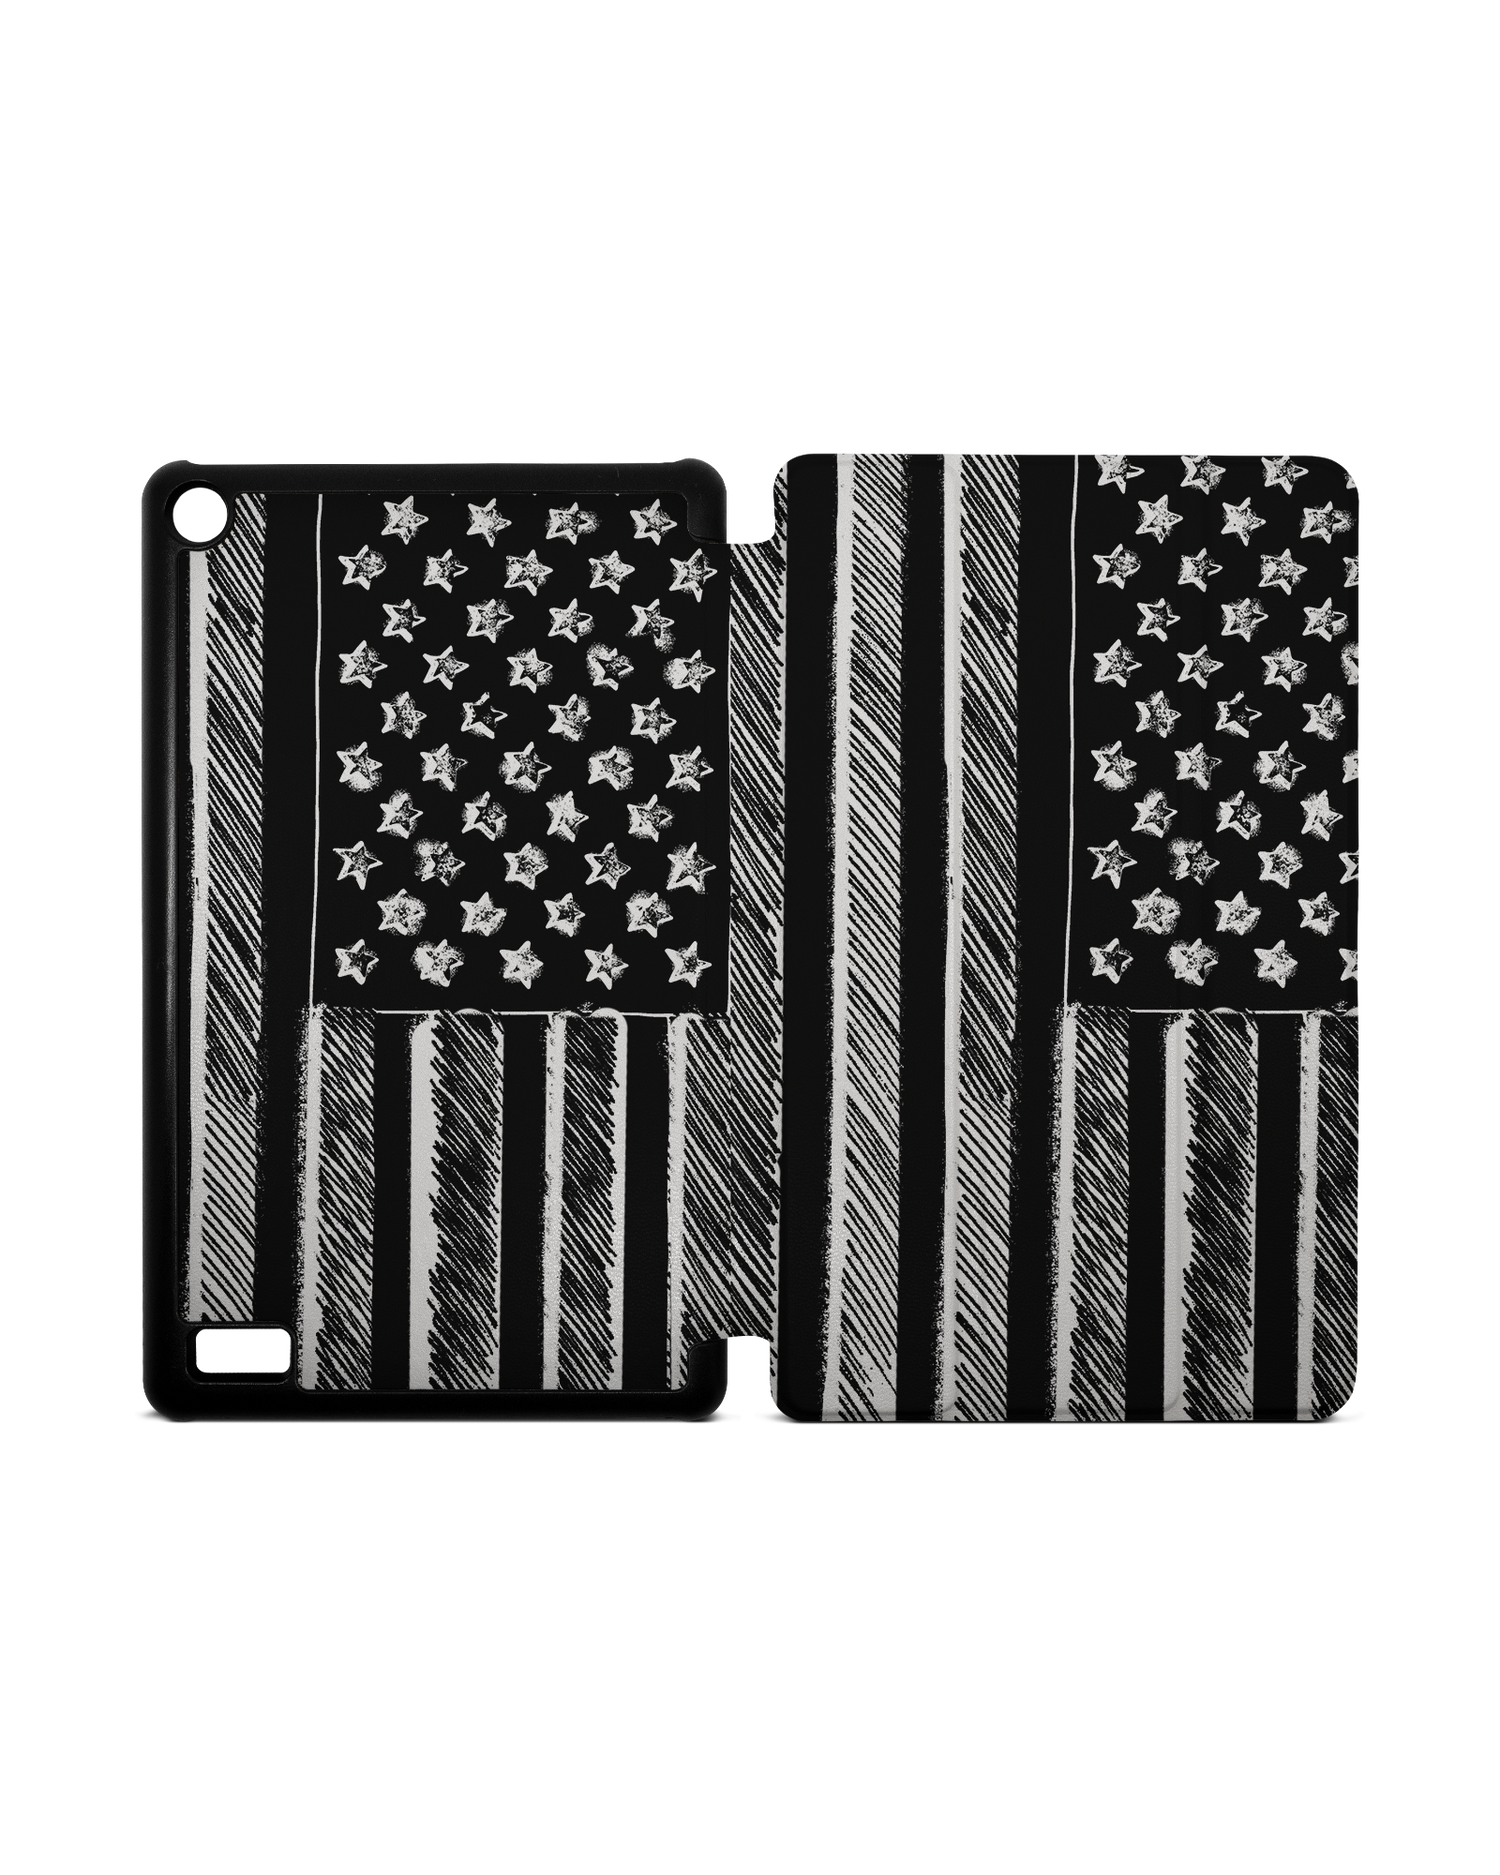 Black and White Tablet Smart Case for Amazon Fire 7: Opened